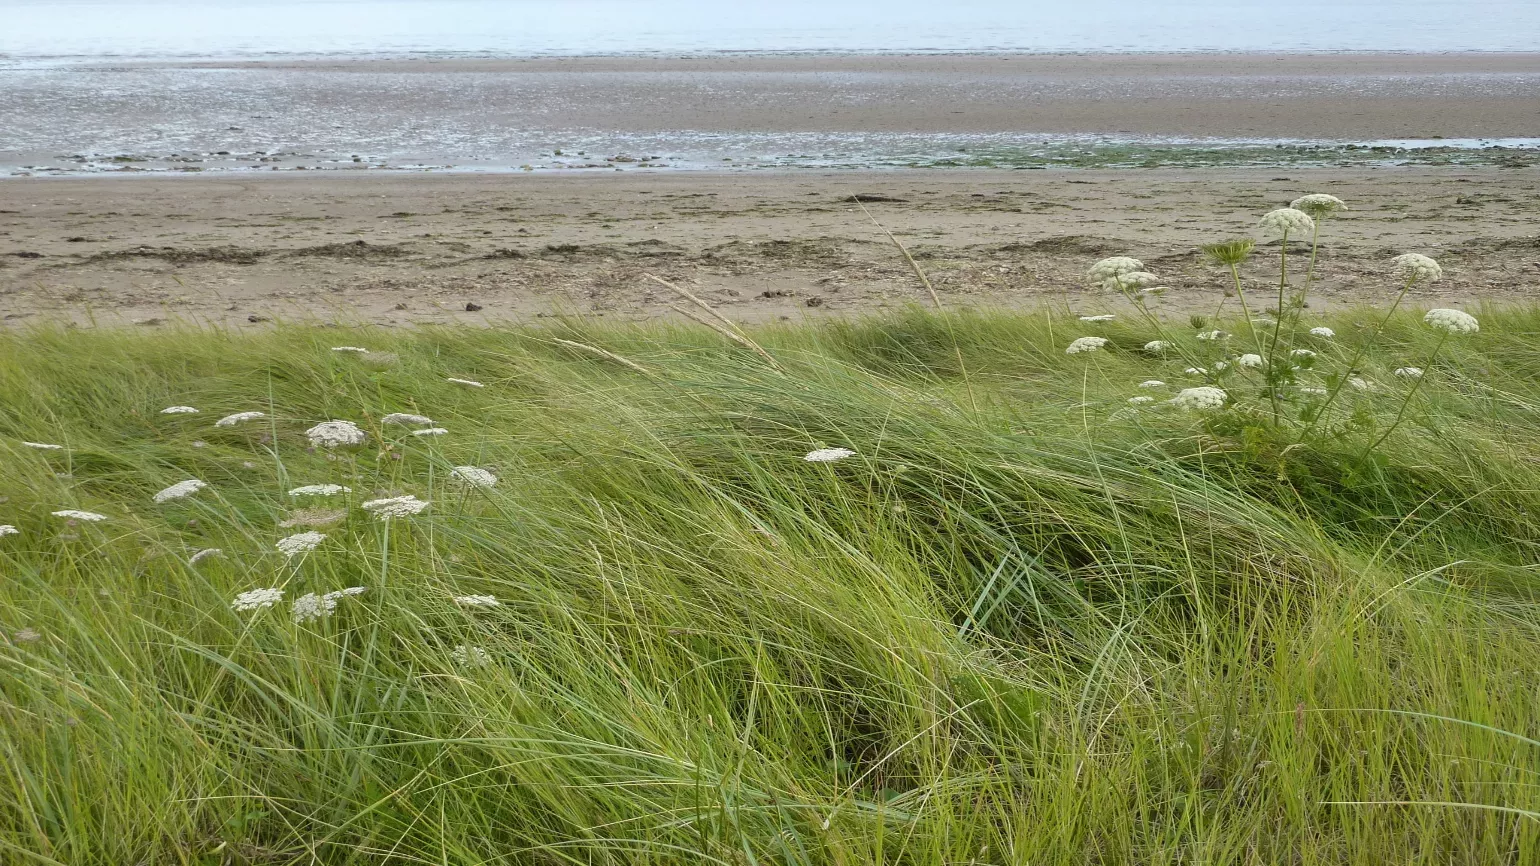 Several white wild carrot flowers growing in green grass near a beach